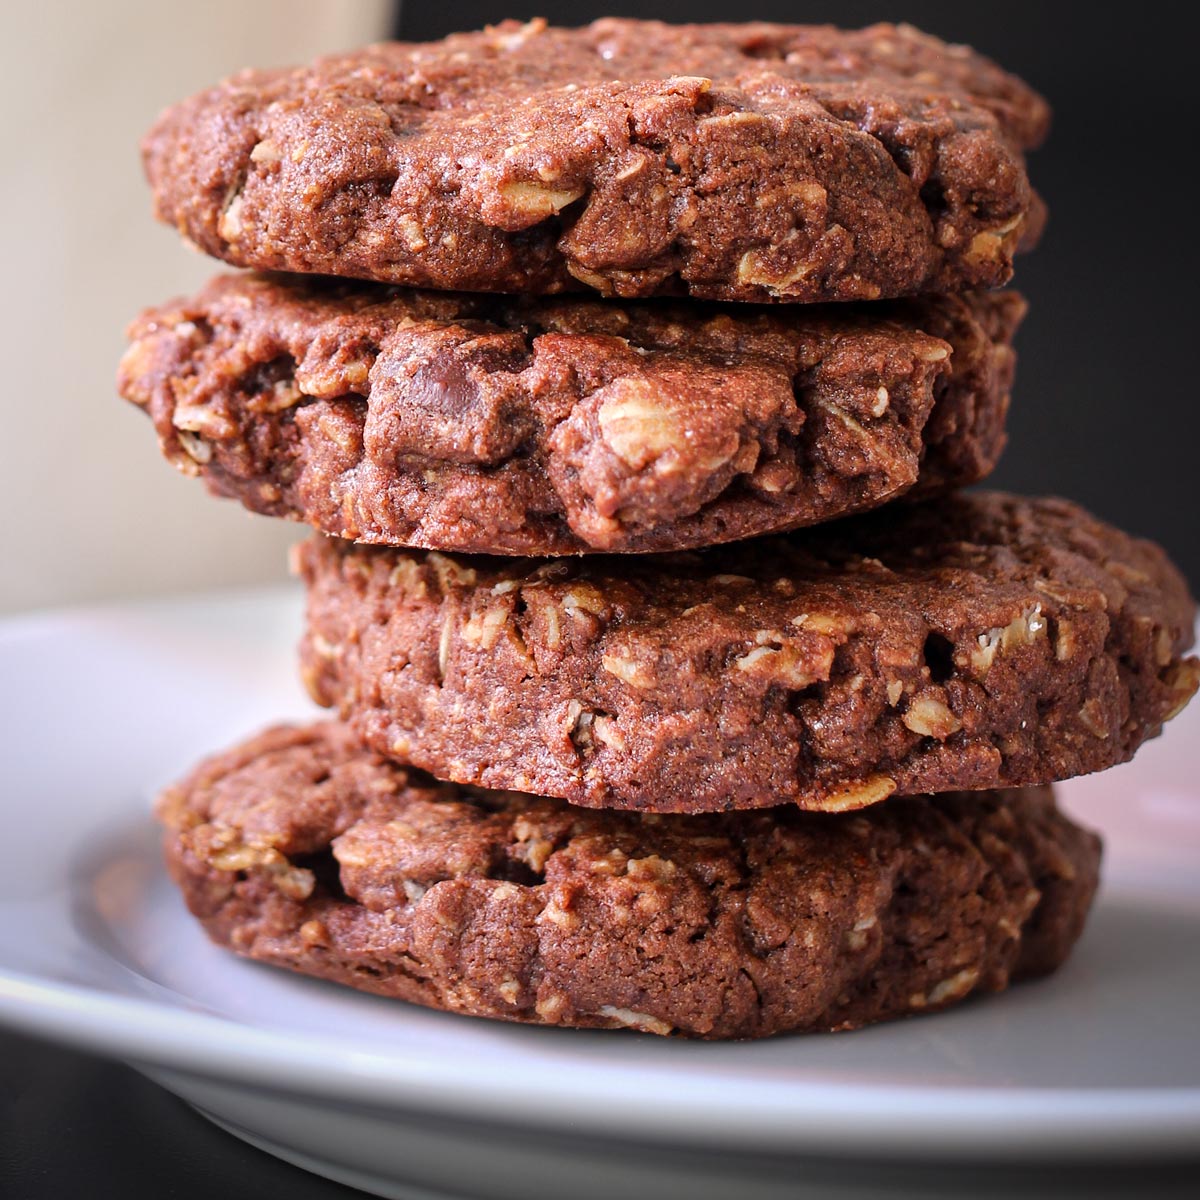 stack of double chocolate oatmeal cookies on white plate.